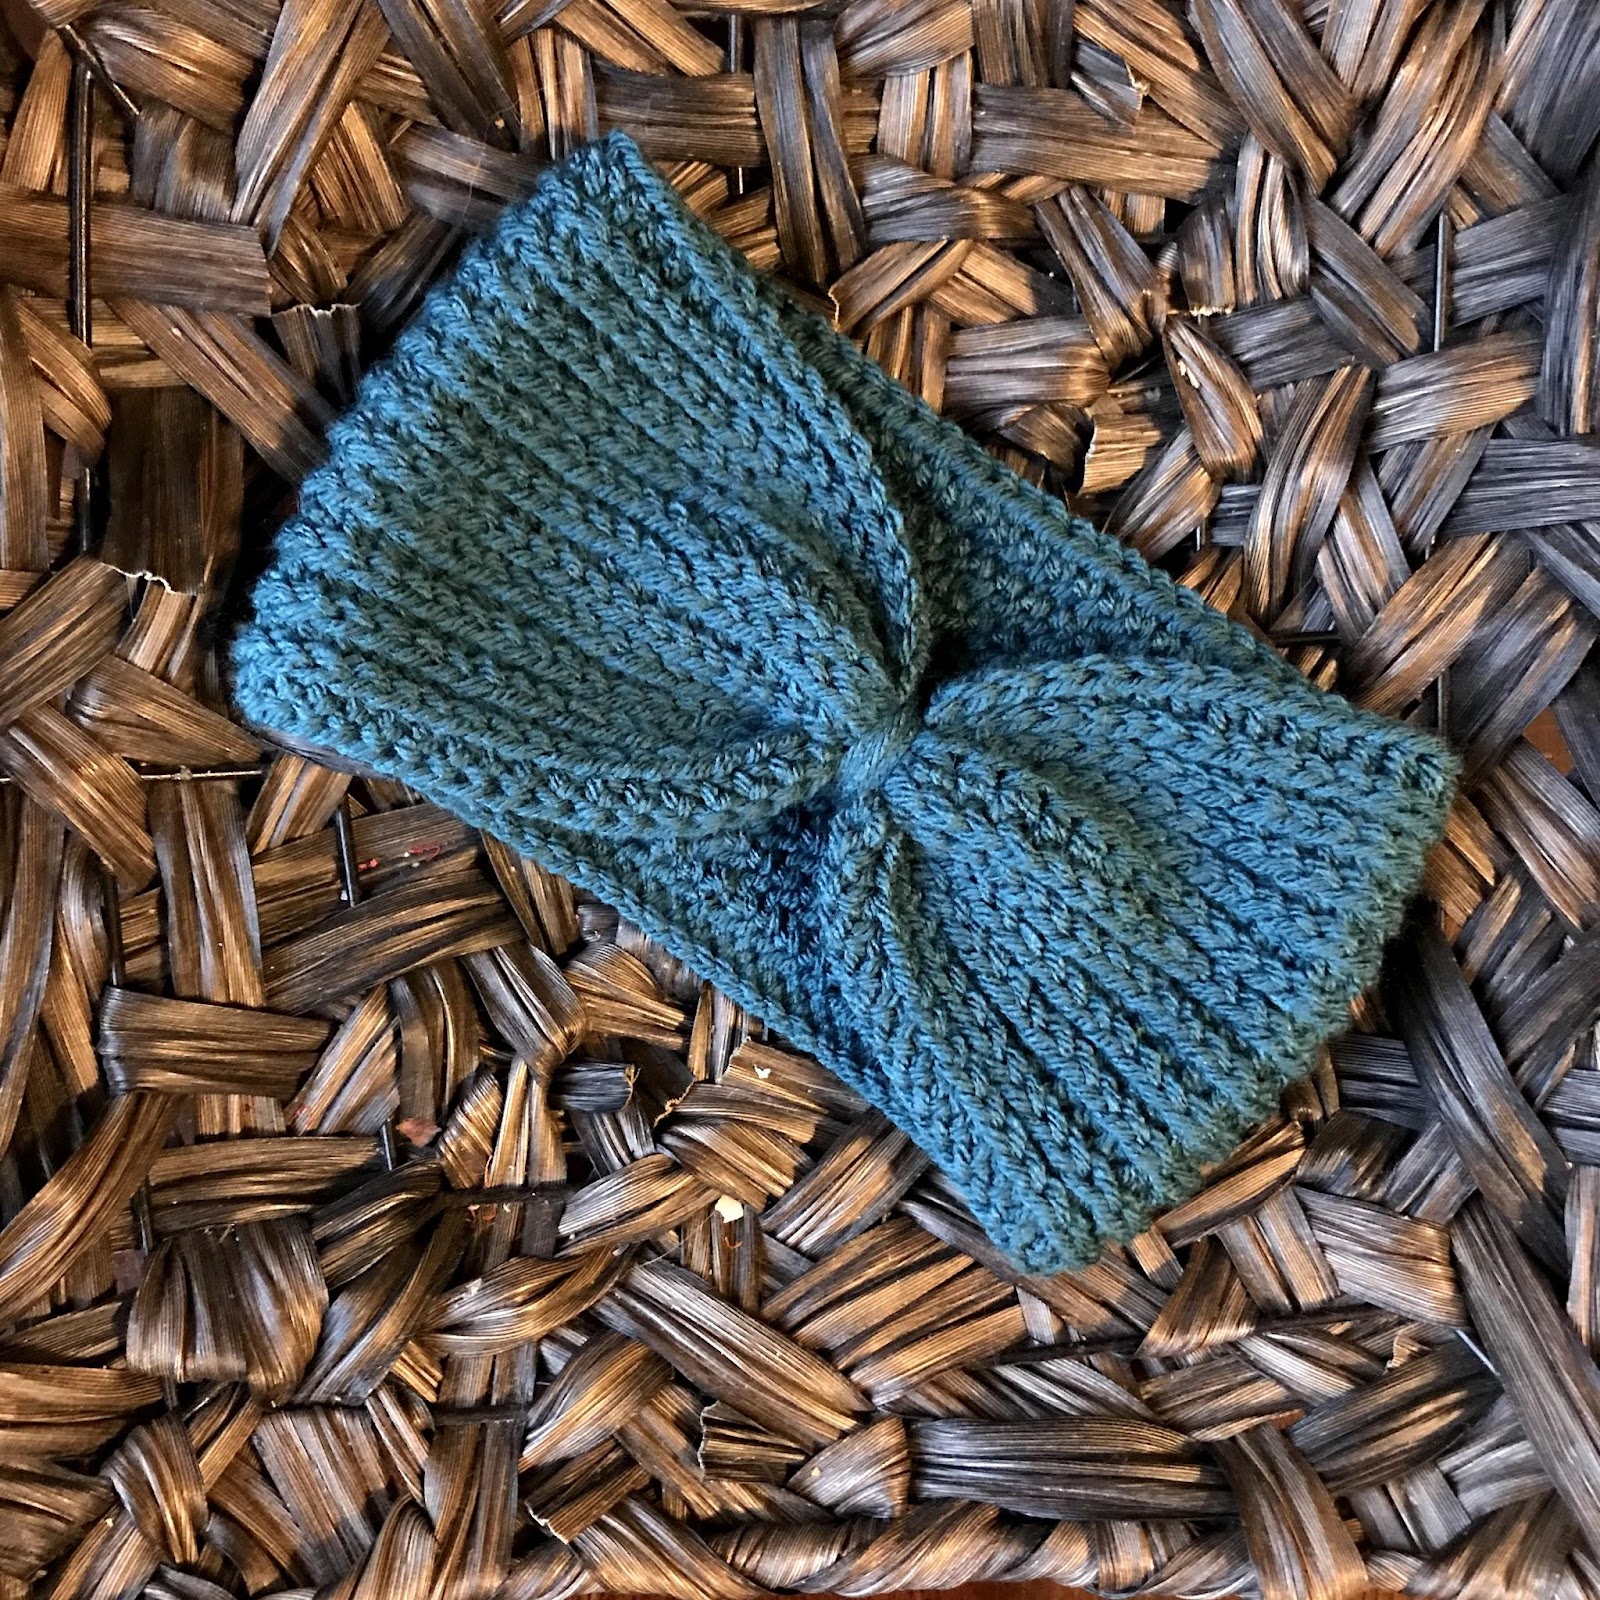 Camel Stitch Ear Warmer Crochet Pattern cinched together in the center